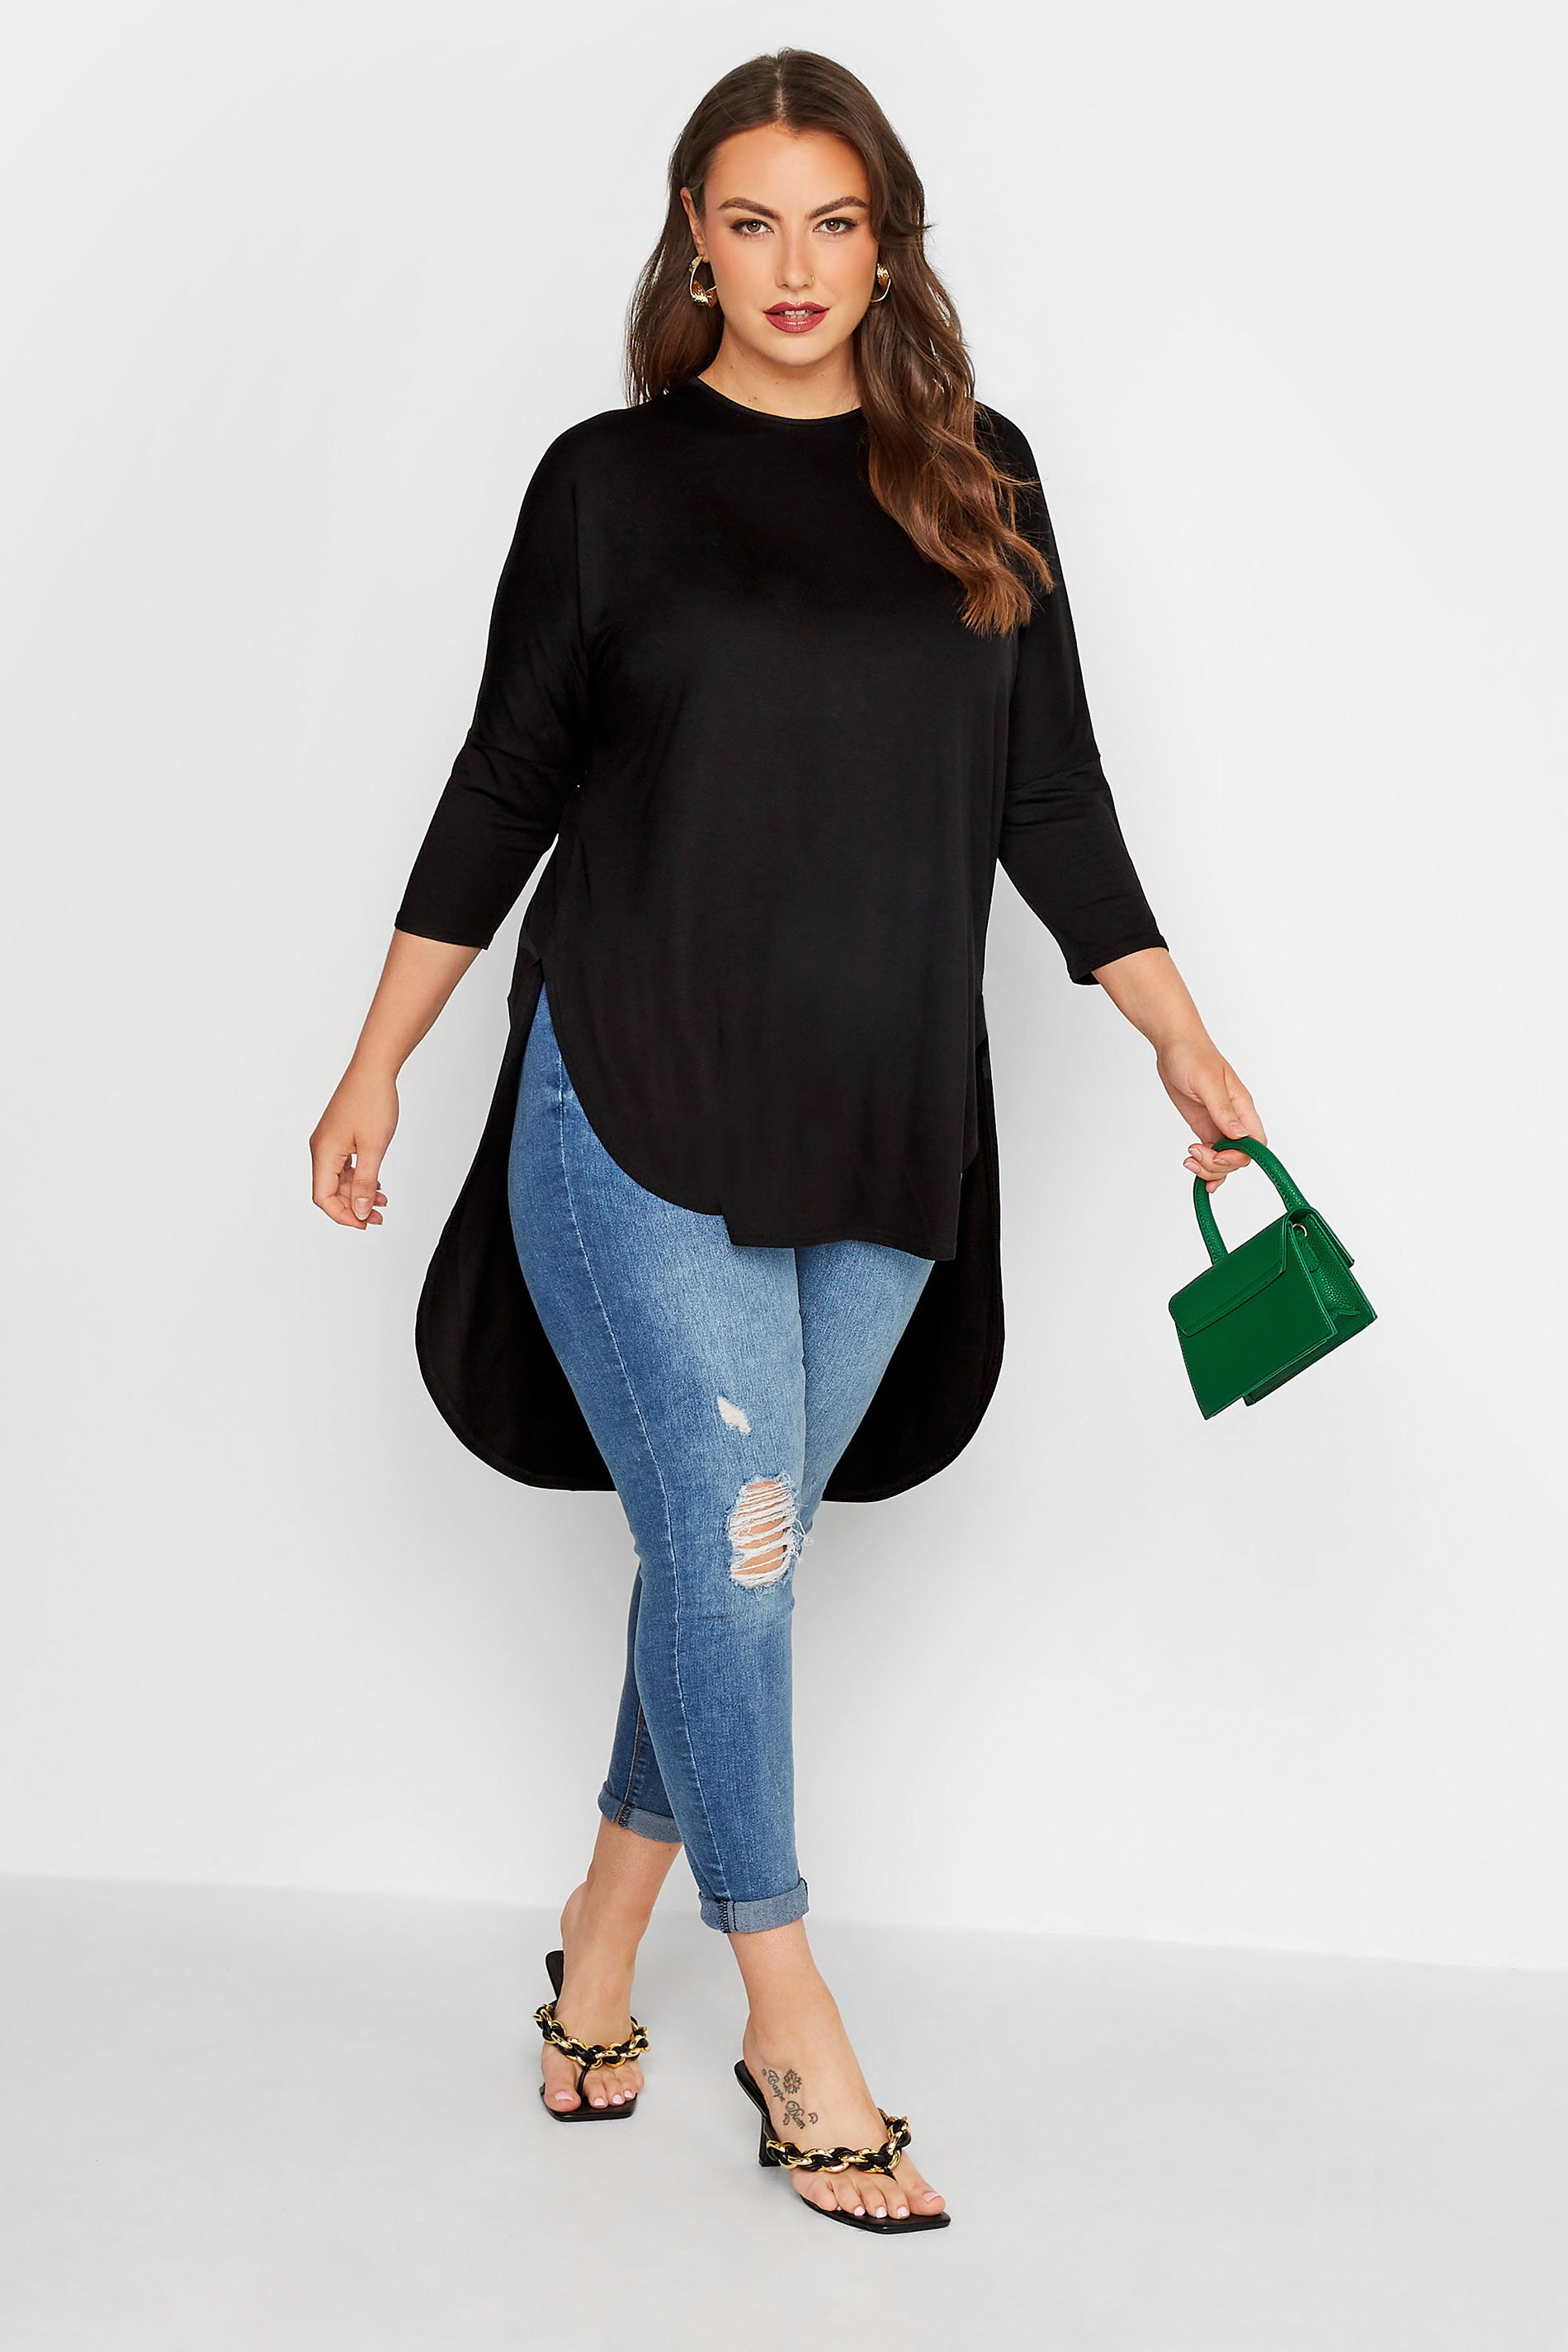 Grande taille  Tops Grande taille  Tops Ourlet Plongeant | LIMITED COLLECTION - T-Shirt Noir Manches Longues Ourlet Plongeant - TY52729